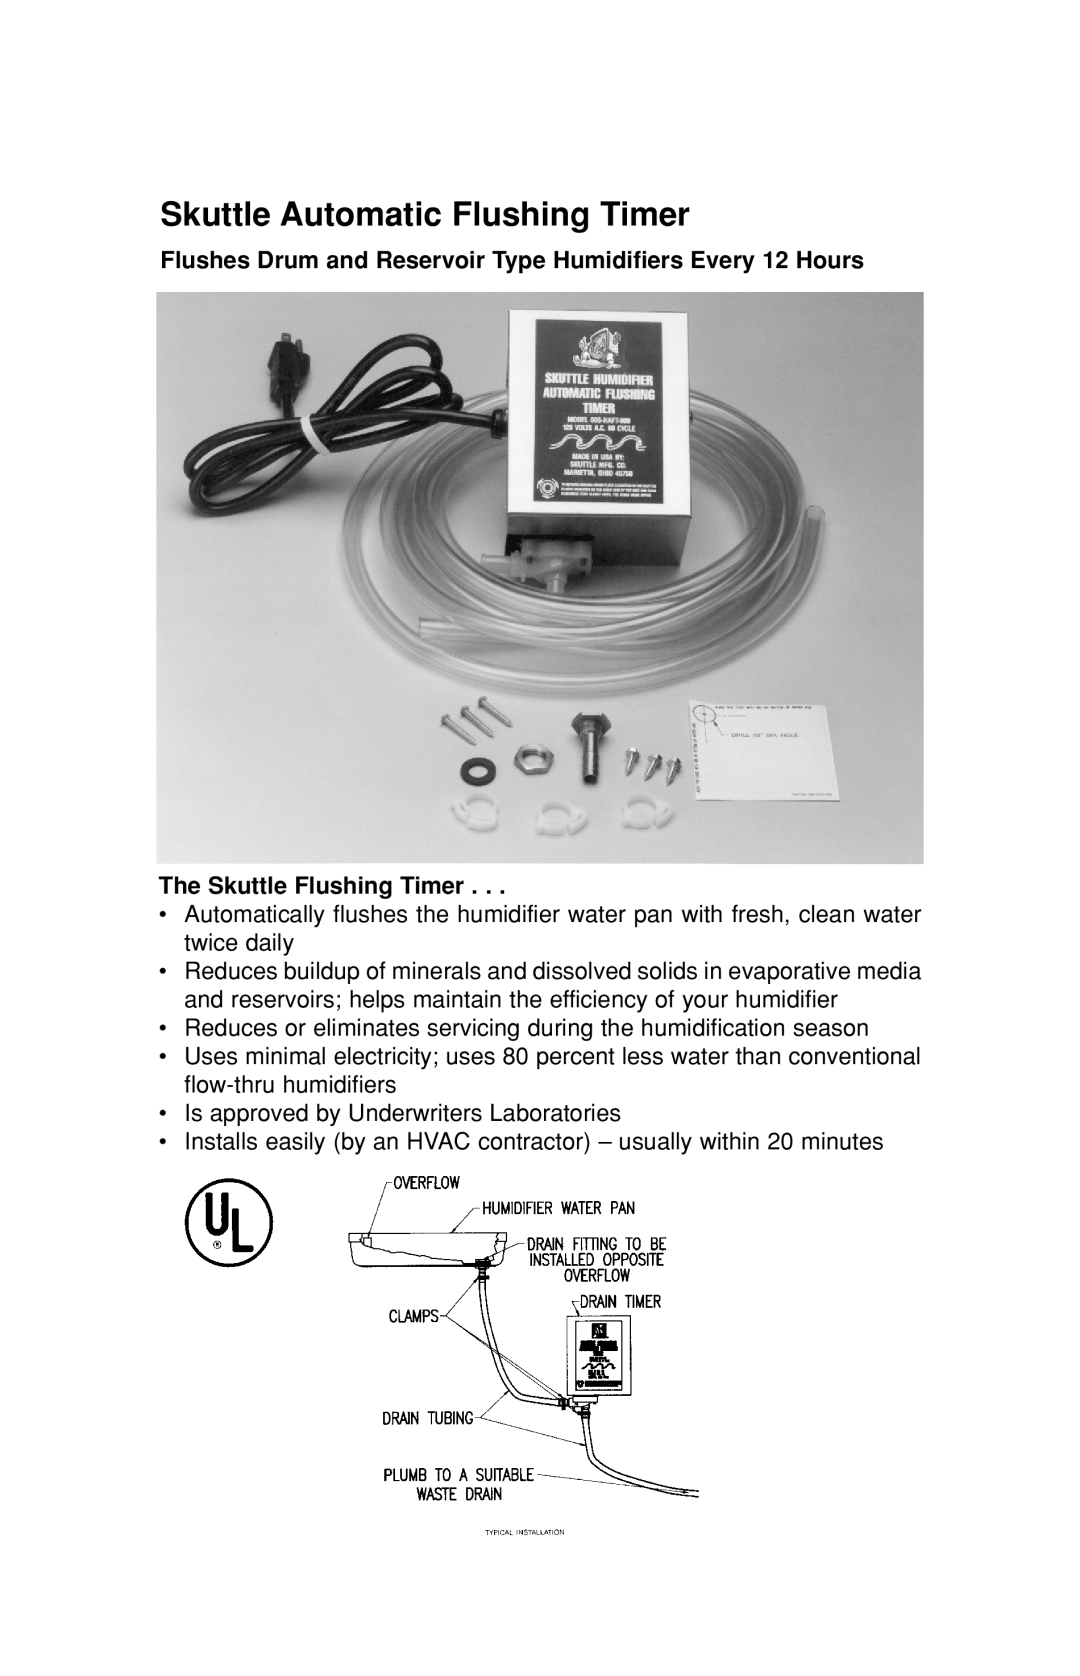 Skuttle Indoor Air Quality Products 190, 45 owner manual Skuttle Automatic Flushing Timer, The Skuttle Flushing Timer 